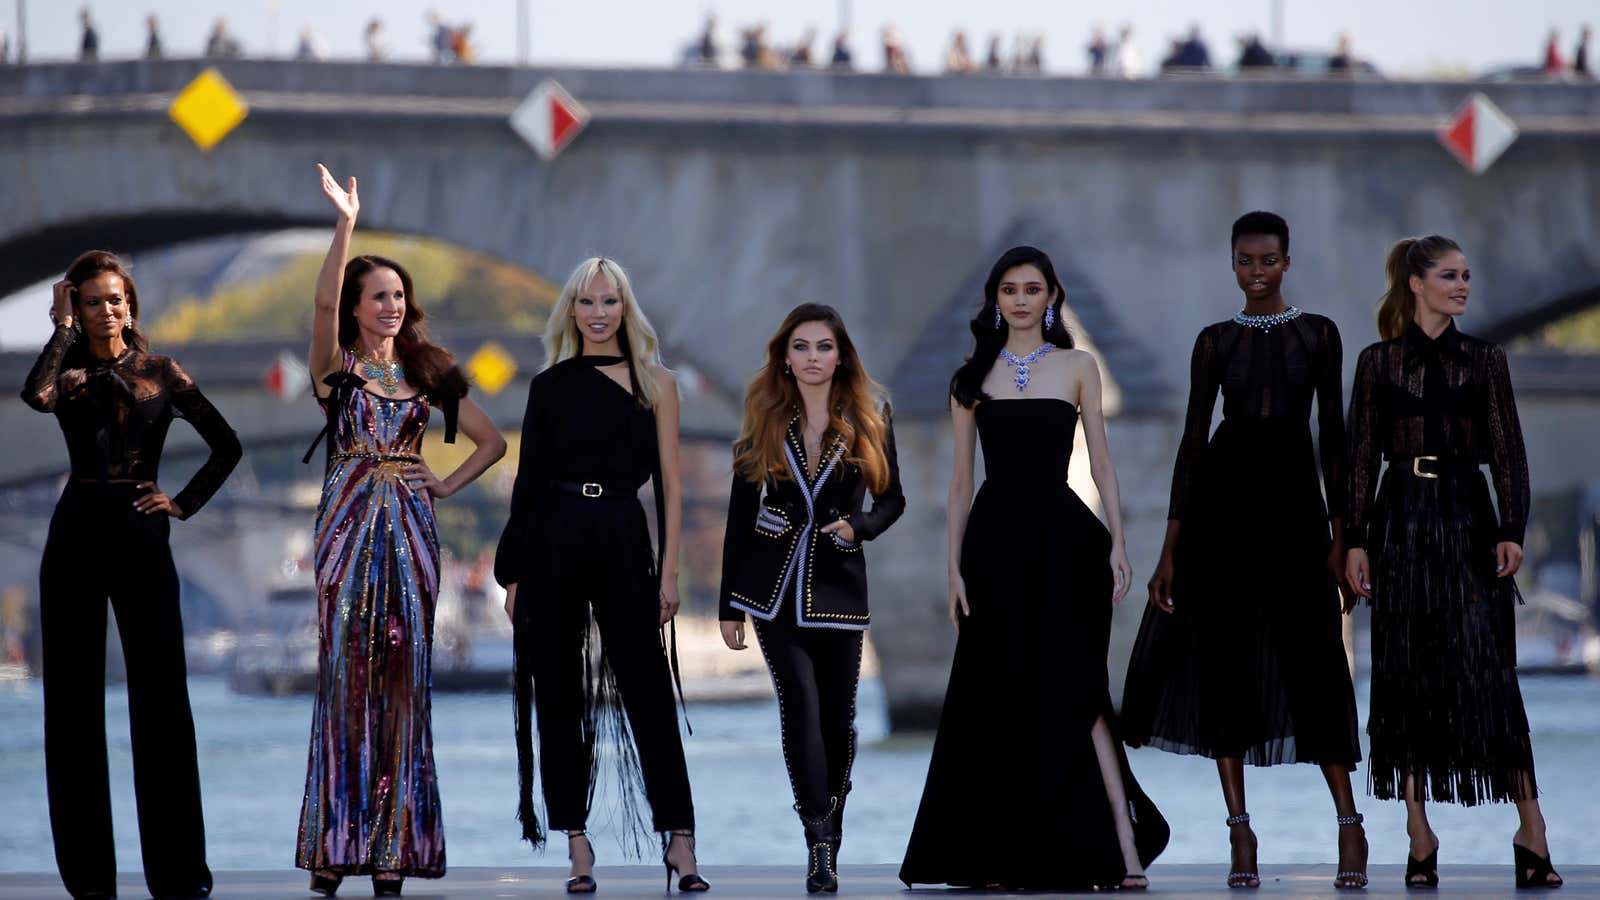 The banks of the Seine will remain an everyday fashion runway.